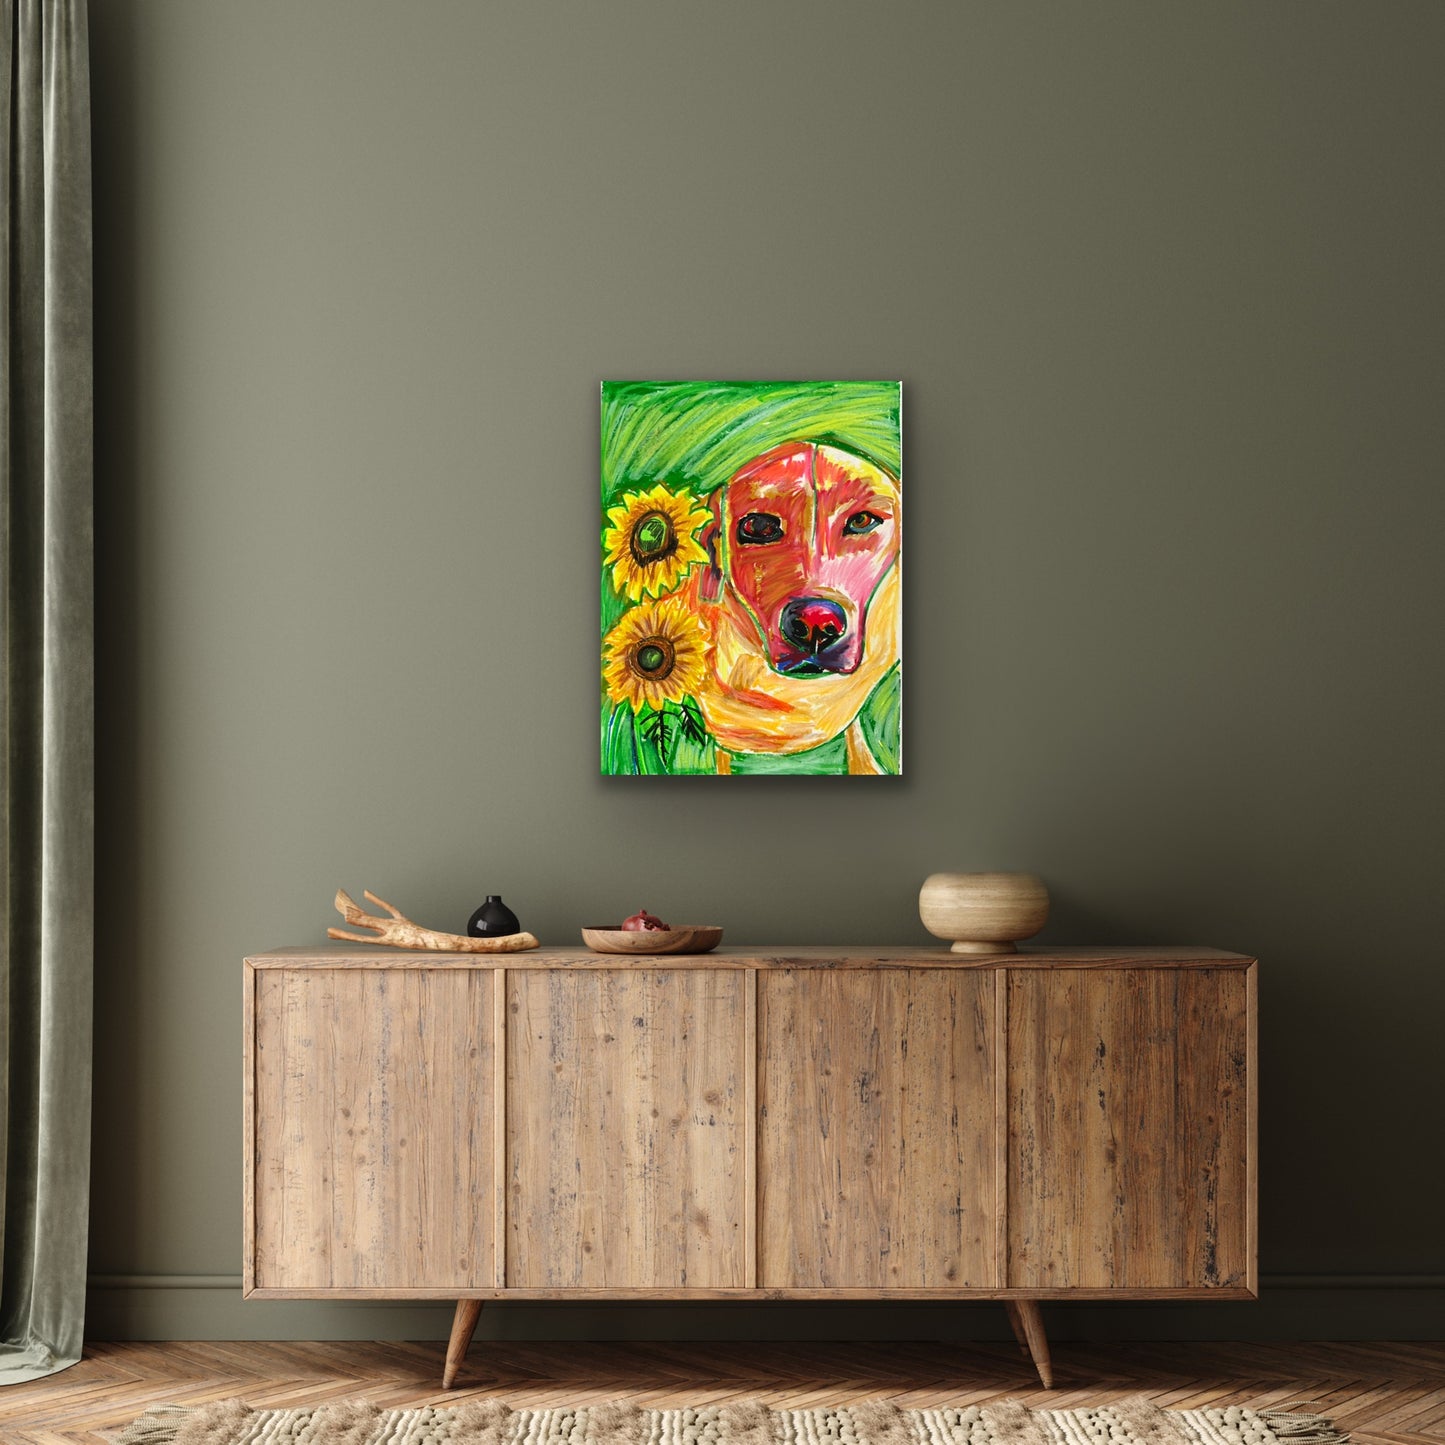 Labrador and the sunflowers - Stretched Canvas Print in more sizes